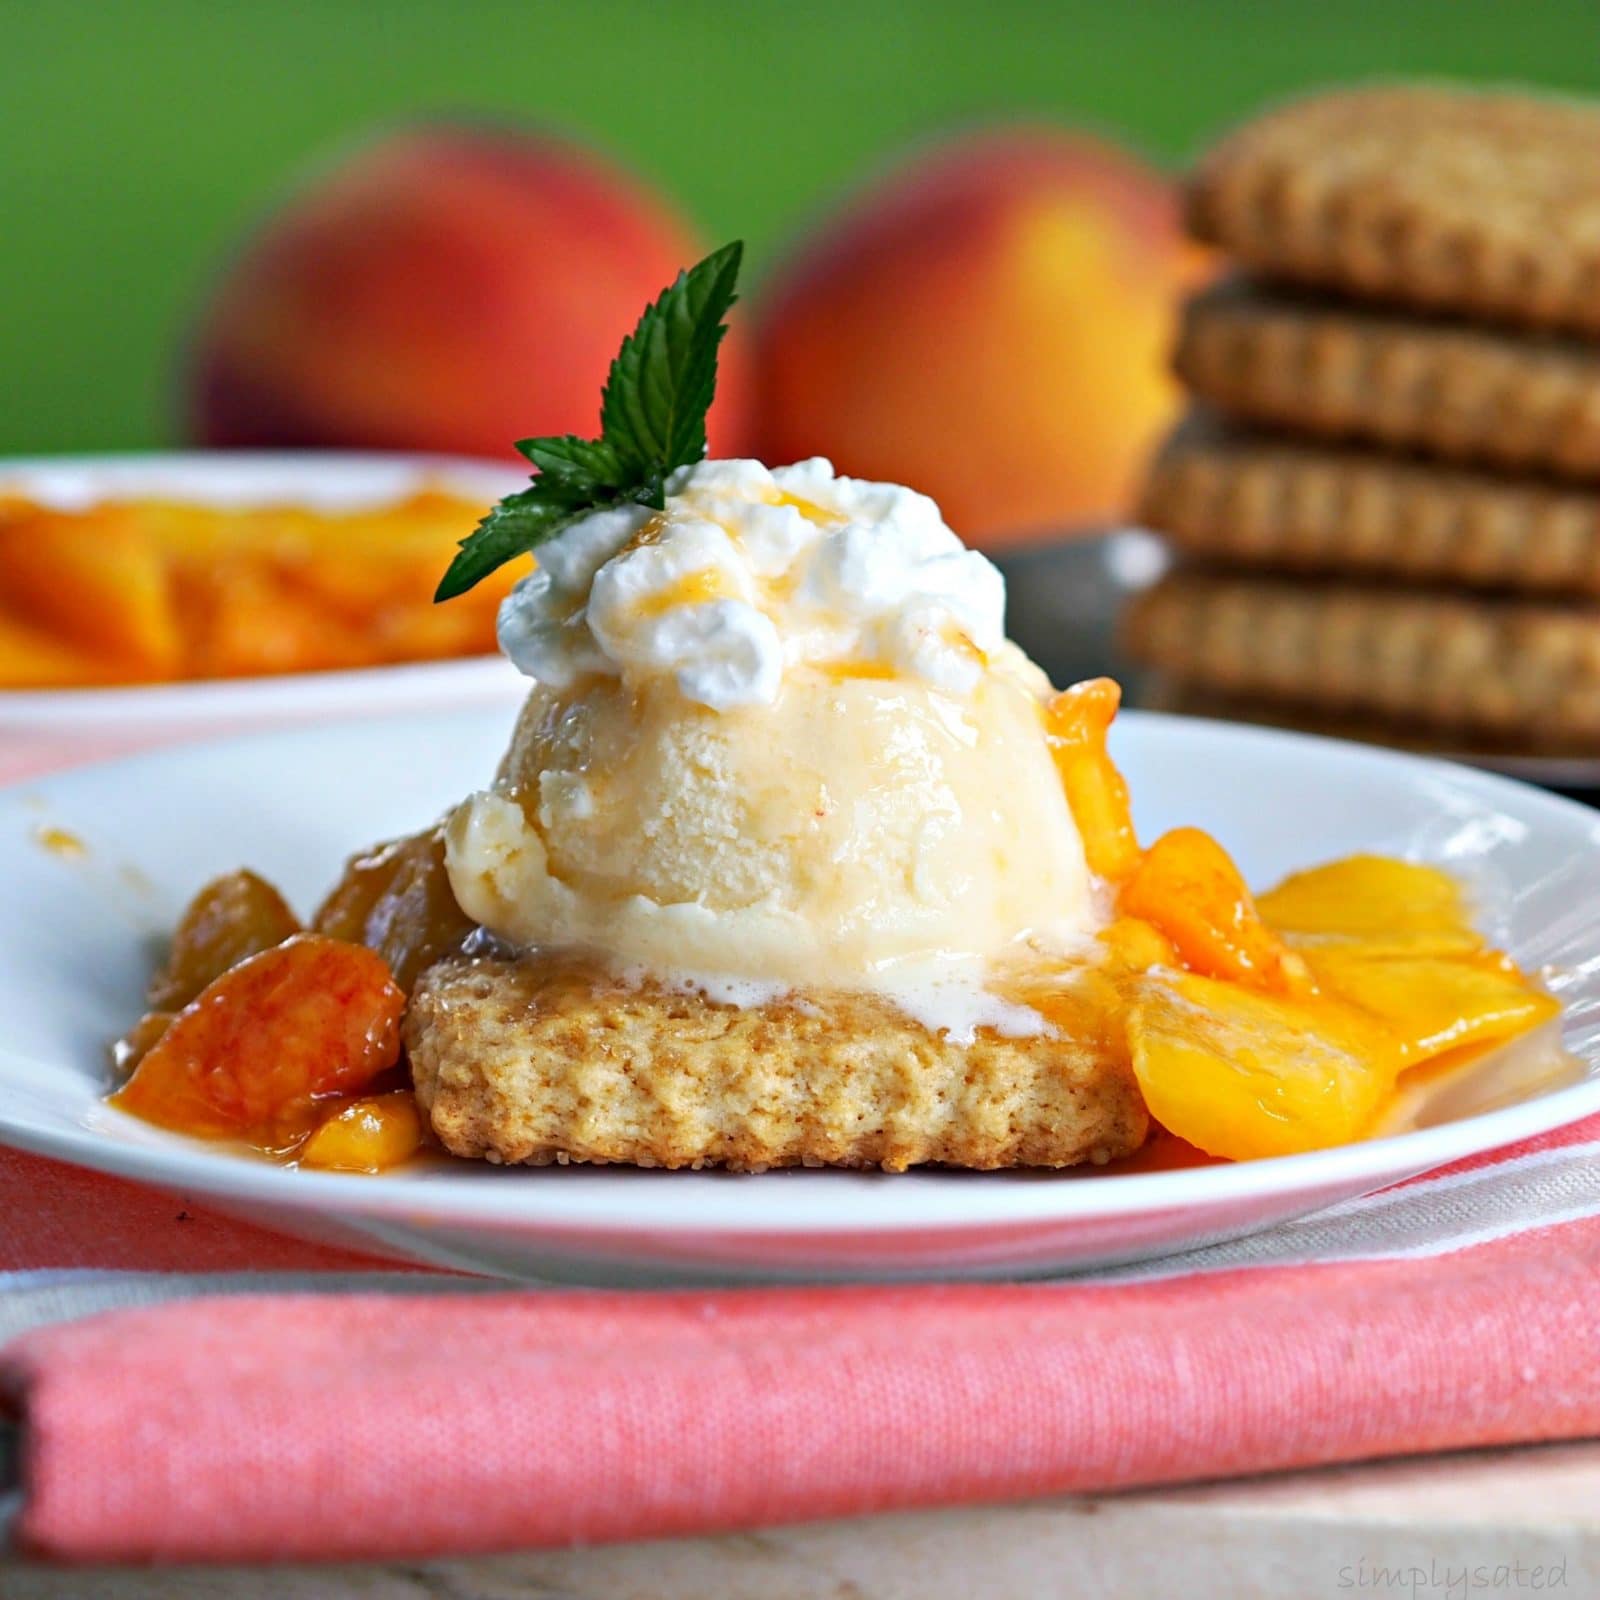 Peach Shortcake made with Simply Sated Perfect Shortcake will become favorite all-time recipe. www.simplysated.com